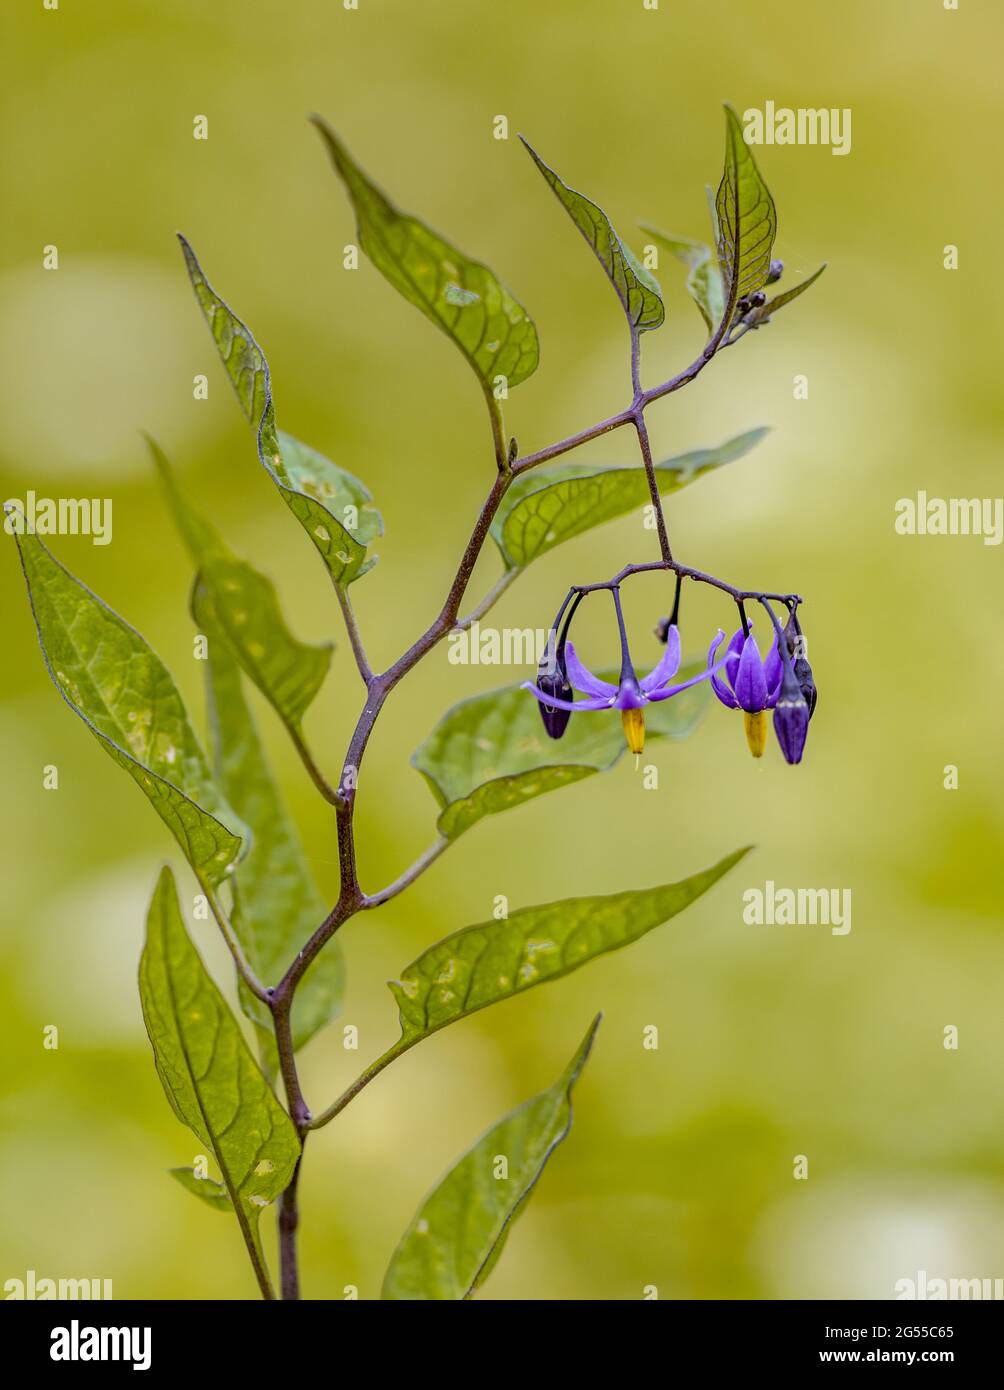 Bittersweet nightshade (Solanum dulcamara) plant, leaves and flowers in bloom on tranquil green background. Vegetation scene in nature of Europe. The Stock Photo